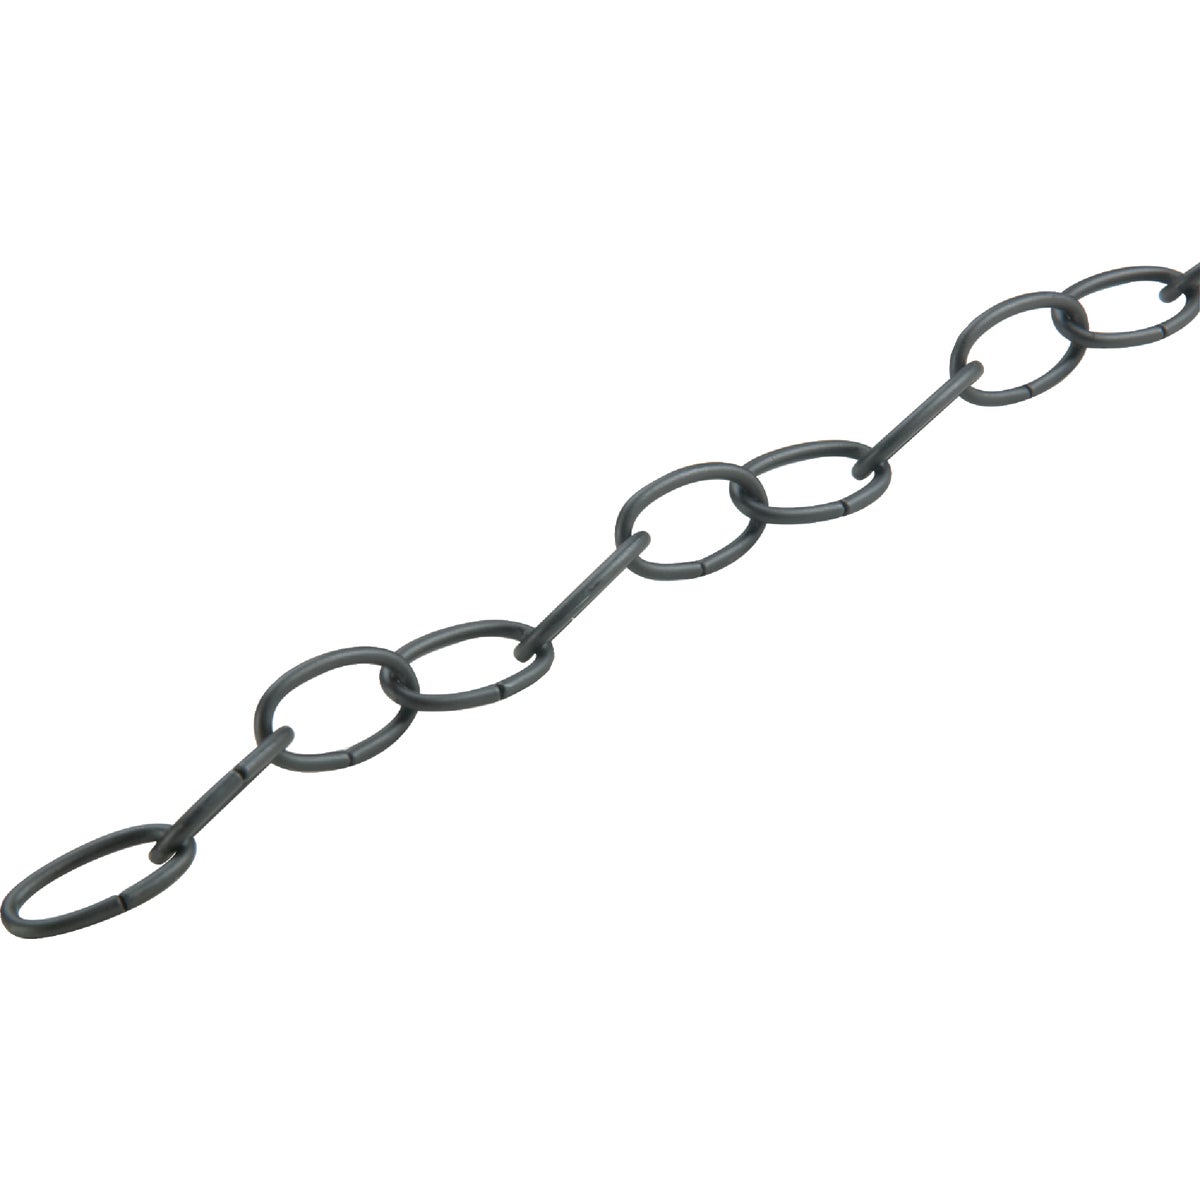 Item 713474, Craft or hobby chain ideal for hanging plants or lamps, or for drapery tie-